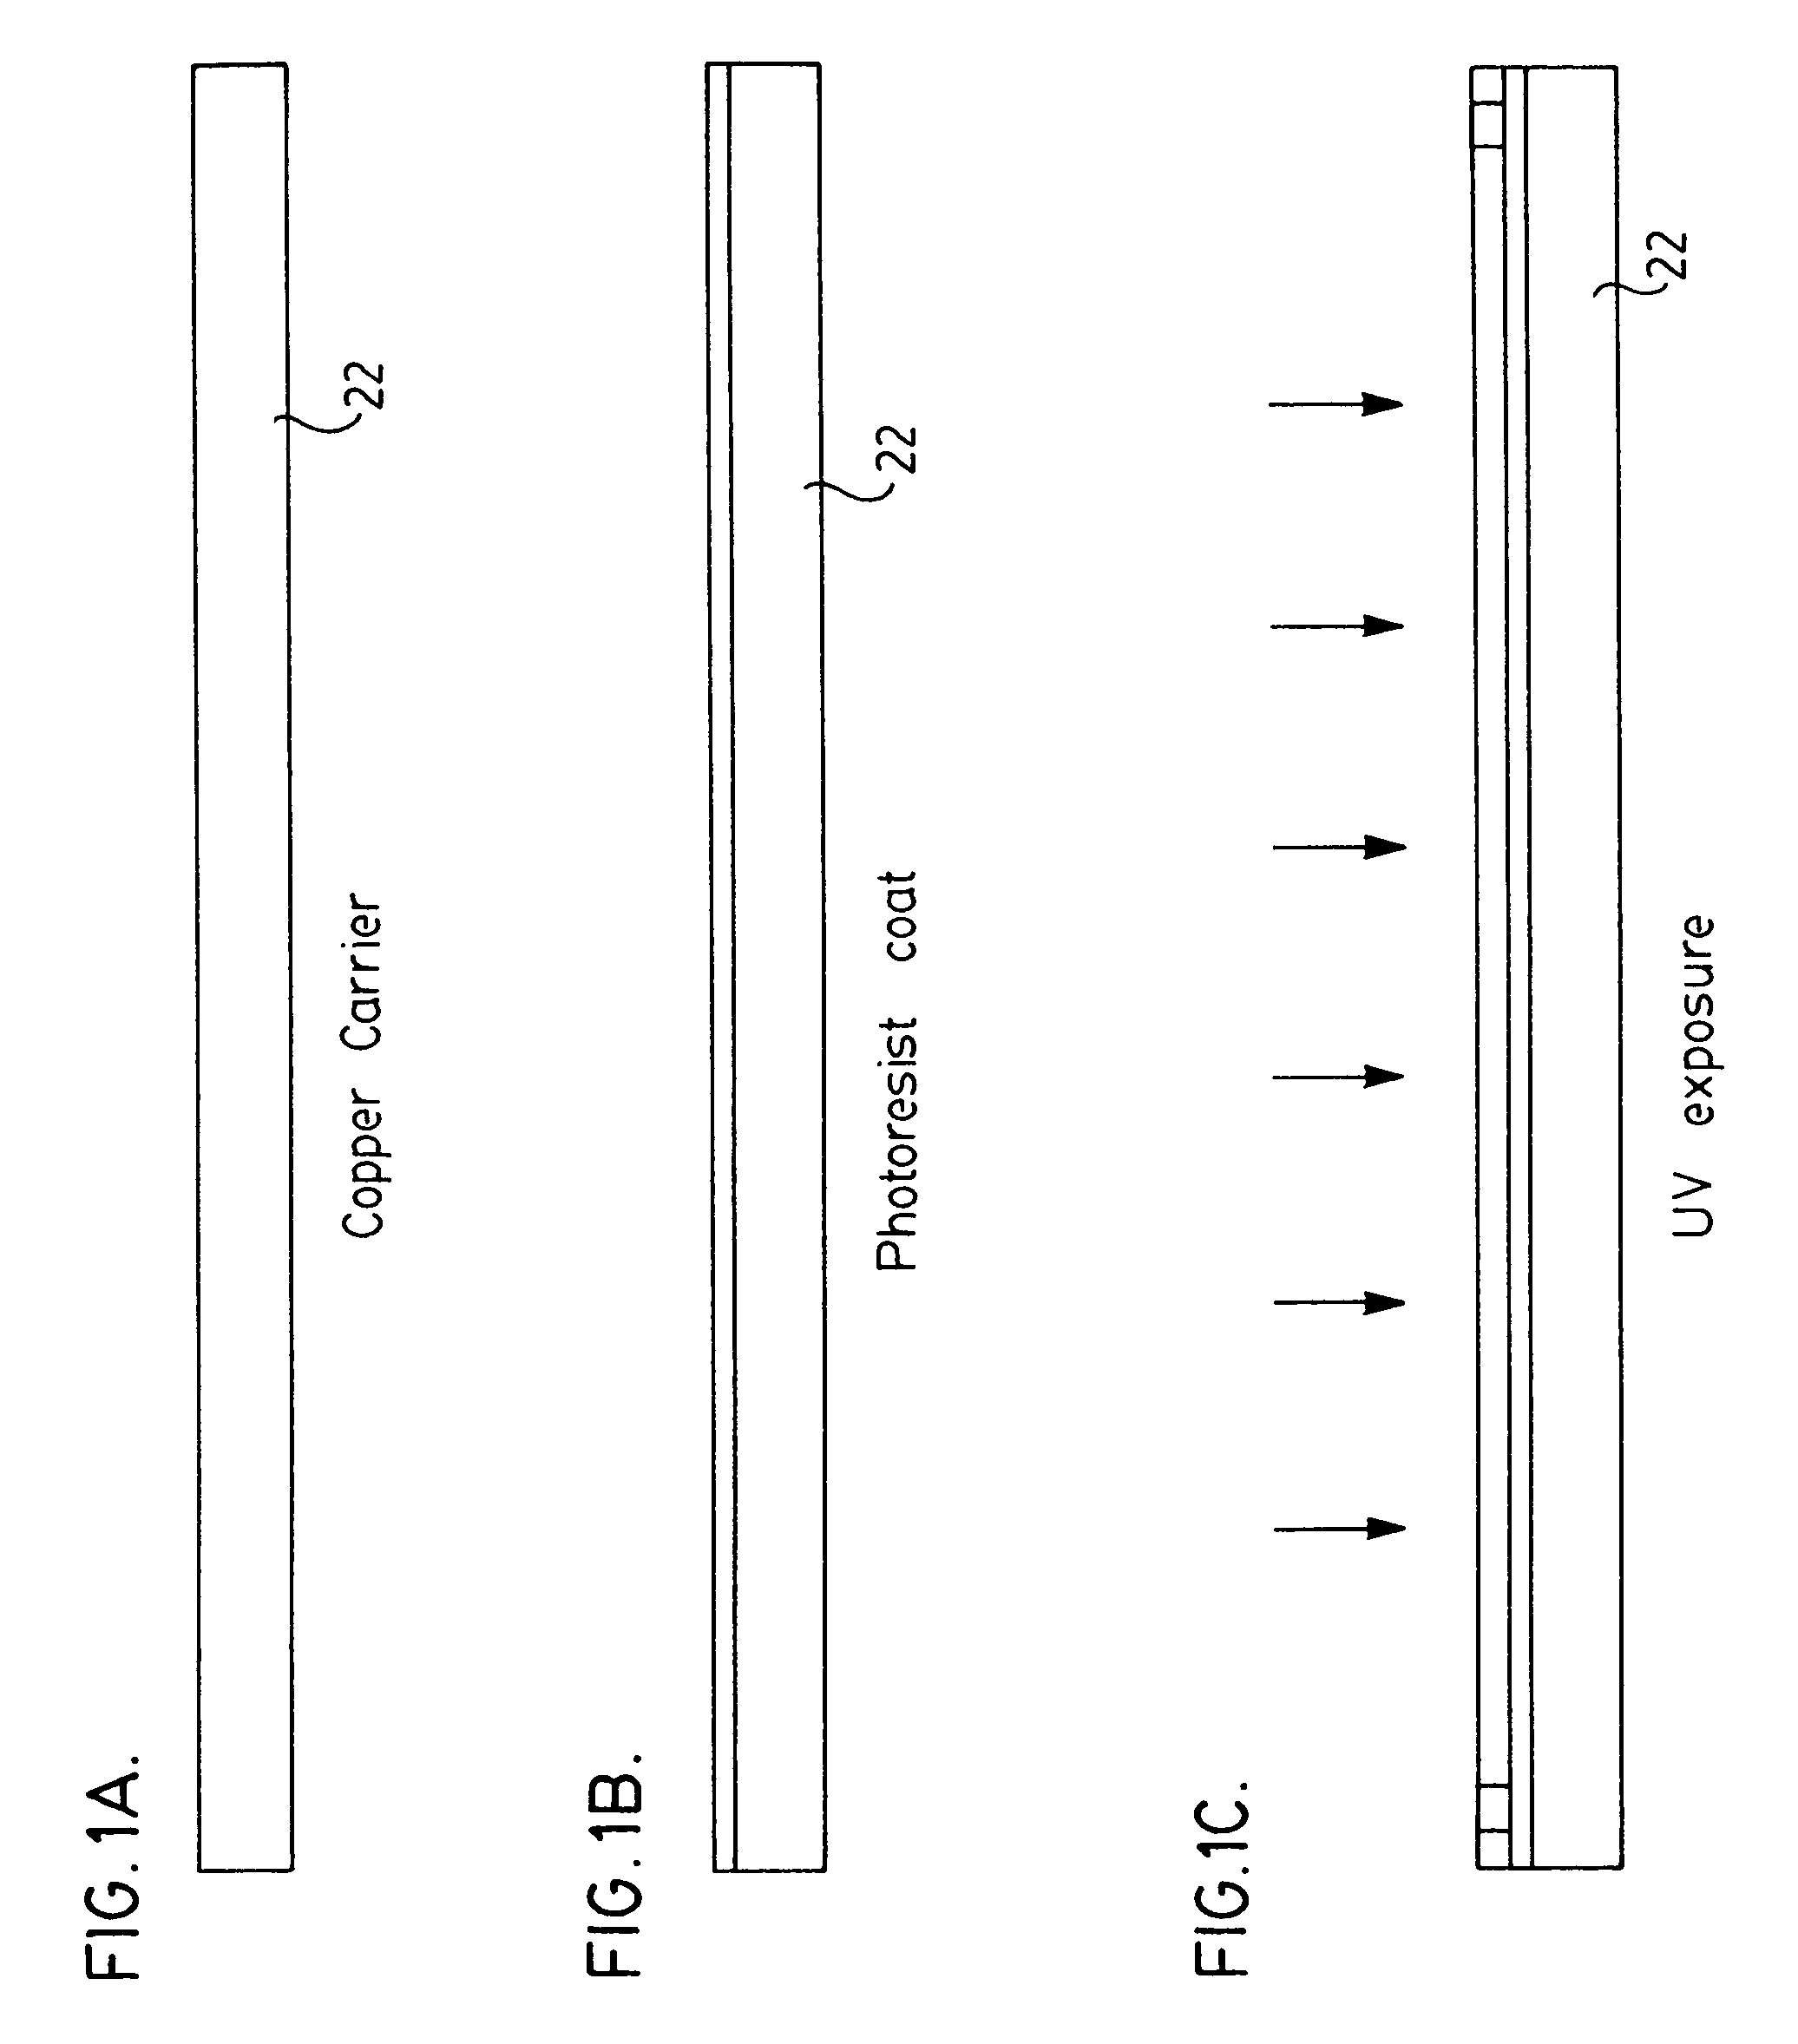 Thin array plastic package without die attach pad and process for fabricating the same